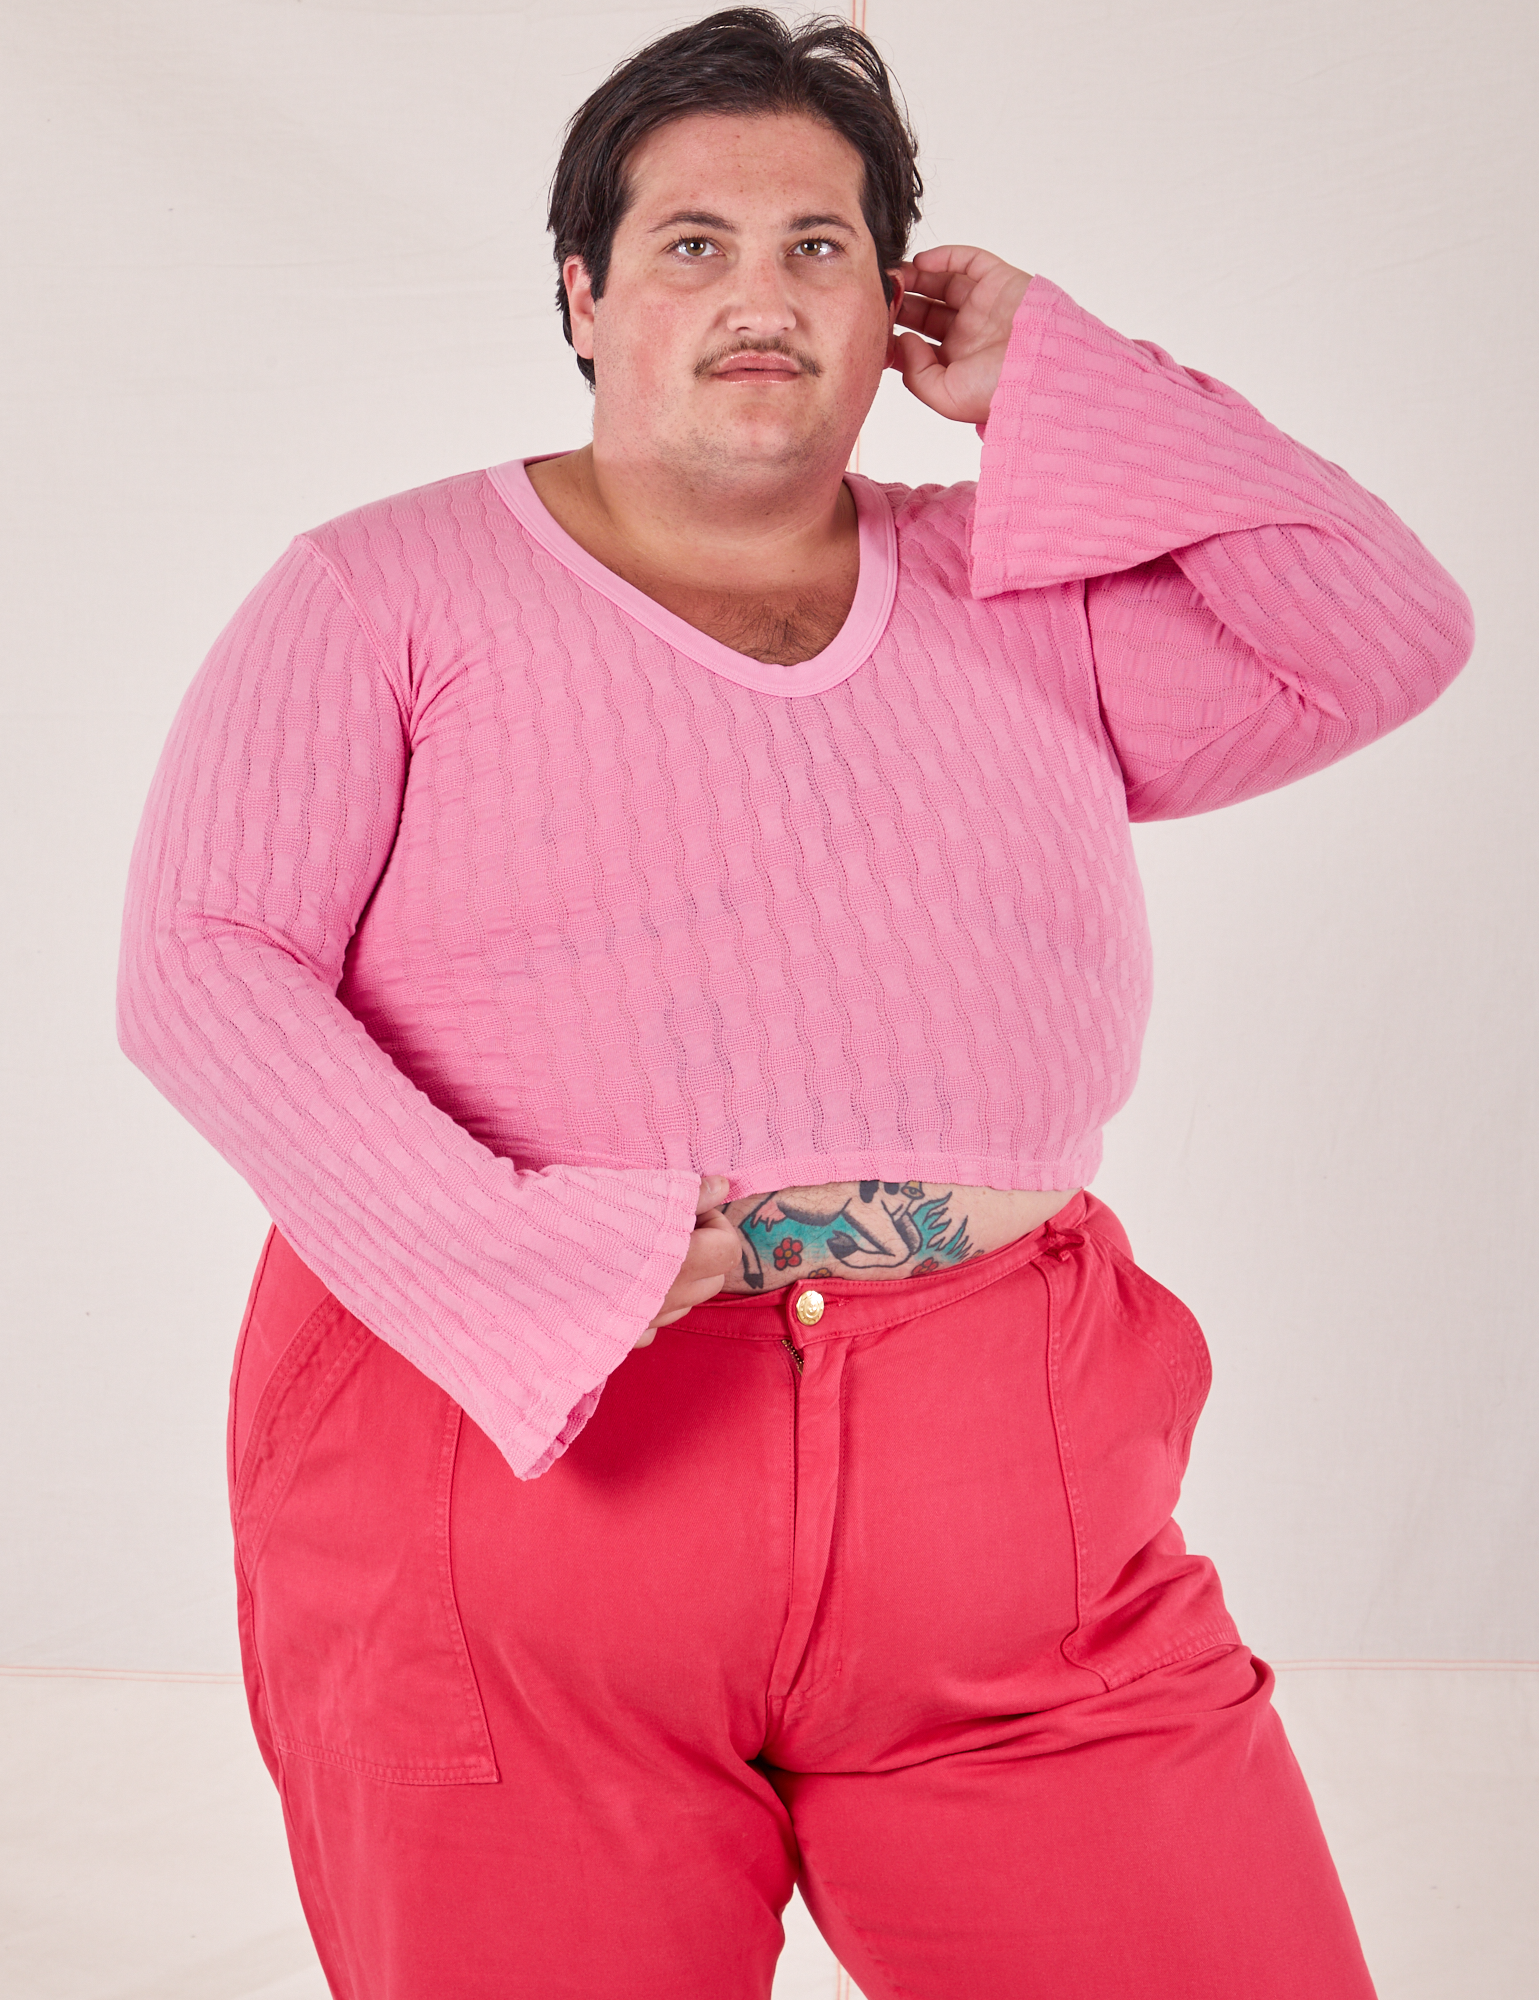 Sam is wearing 1XL Bell Sleeve Top in Bubblegum Pink and hot pink Work Pants